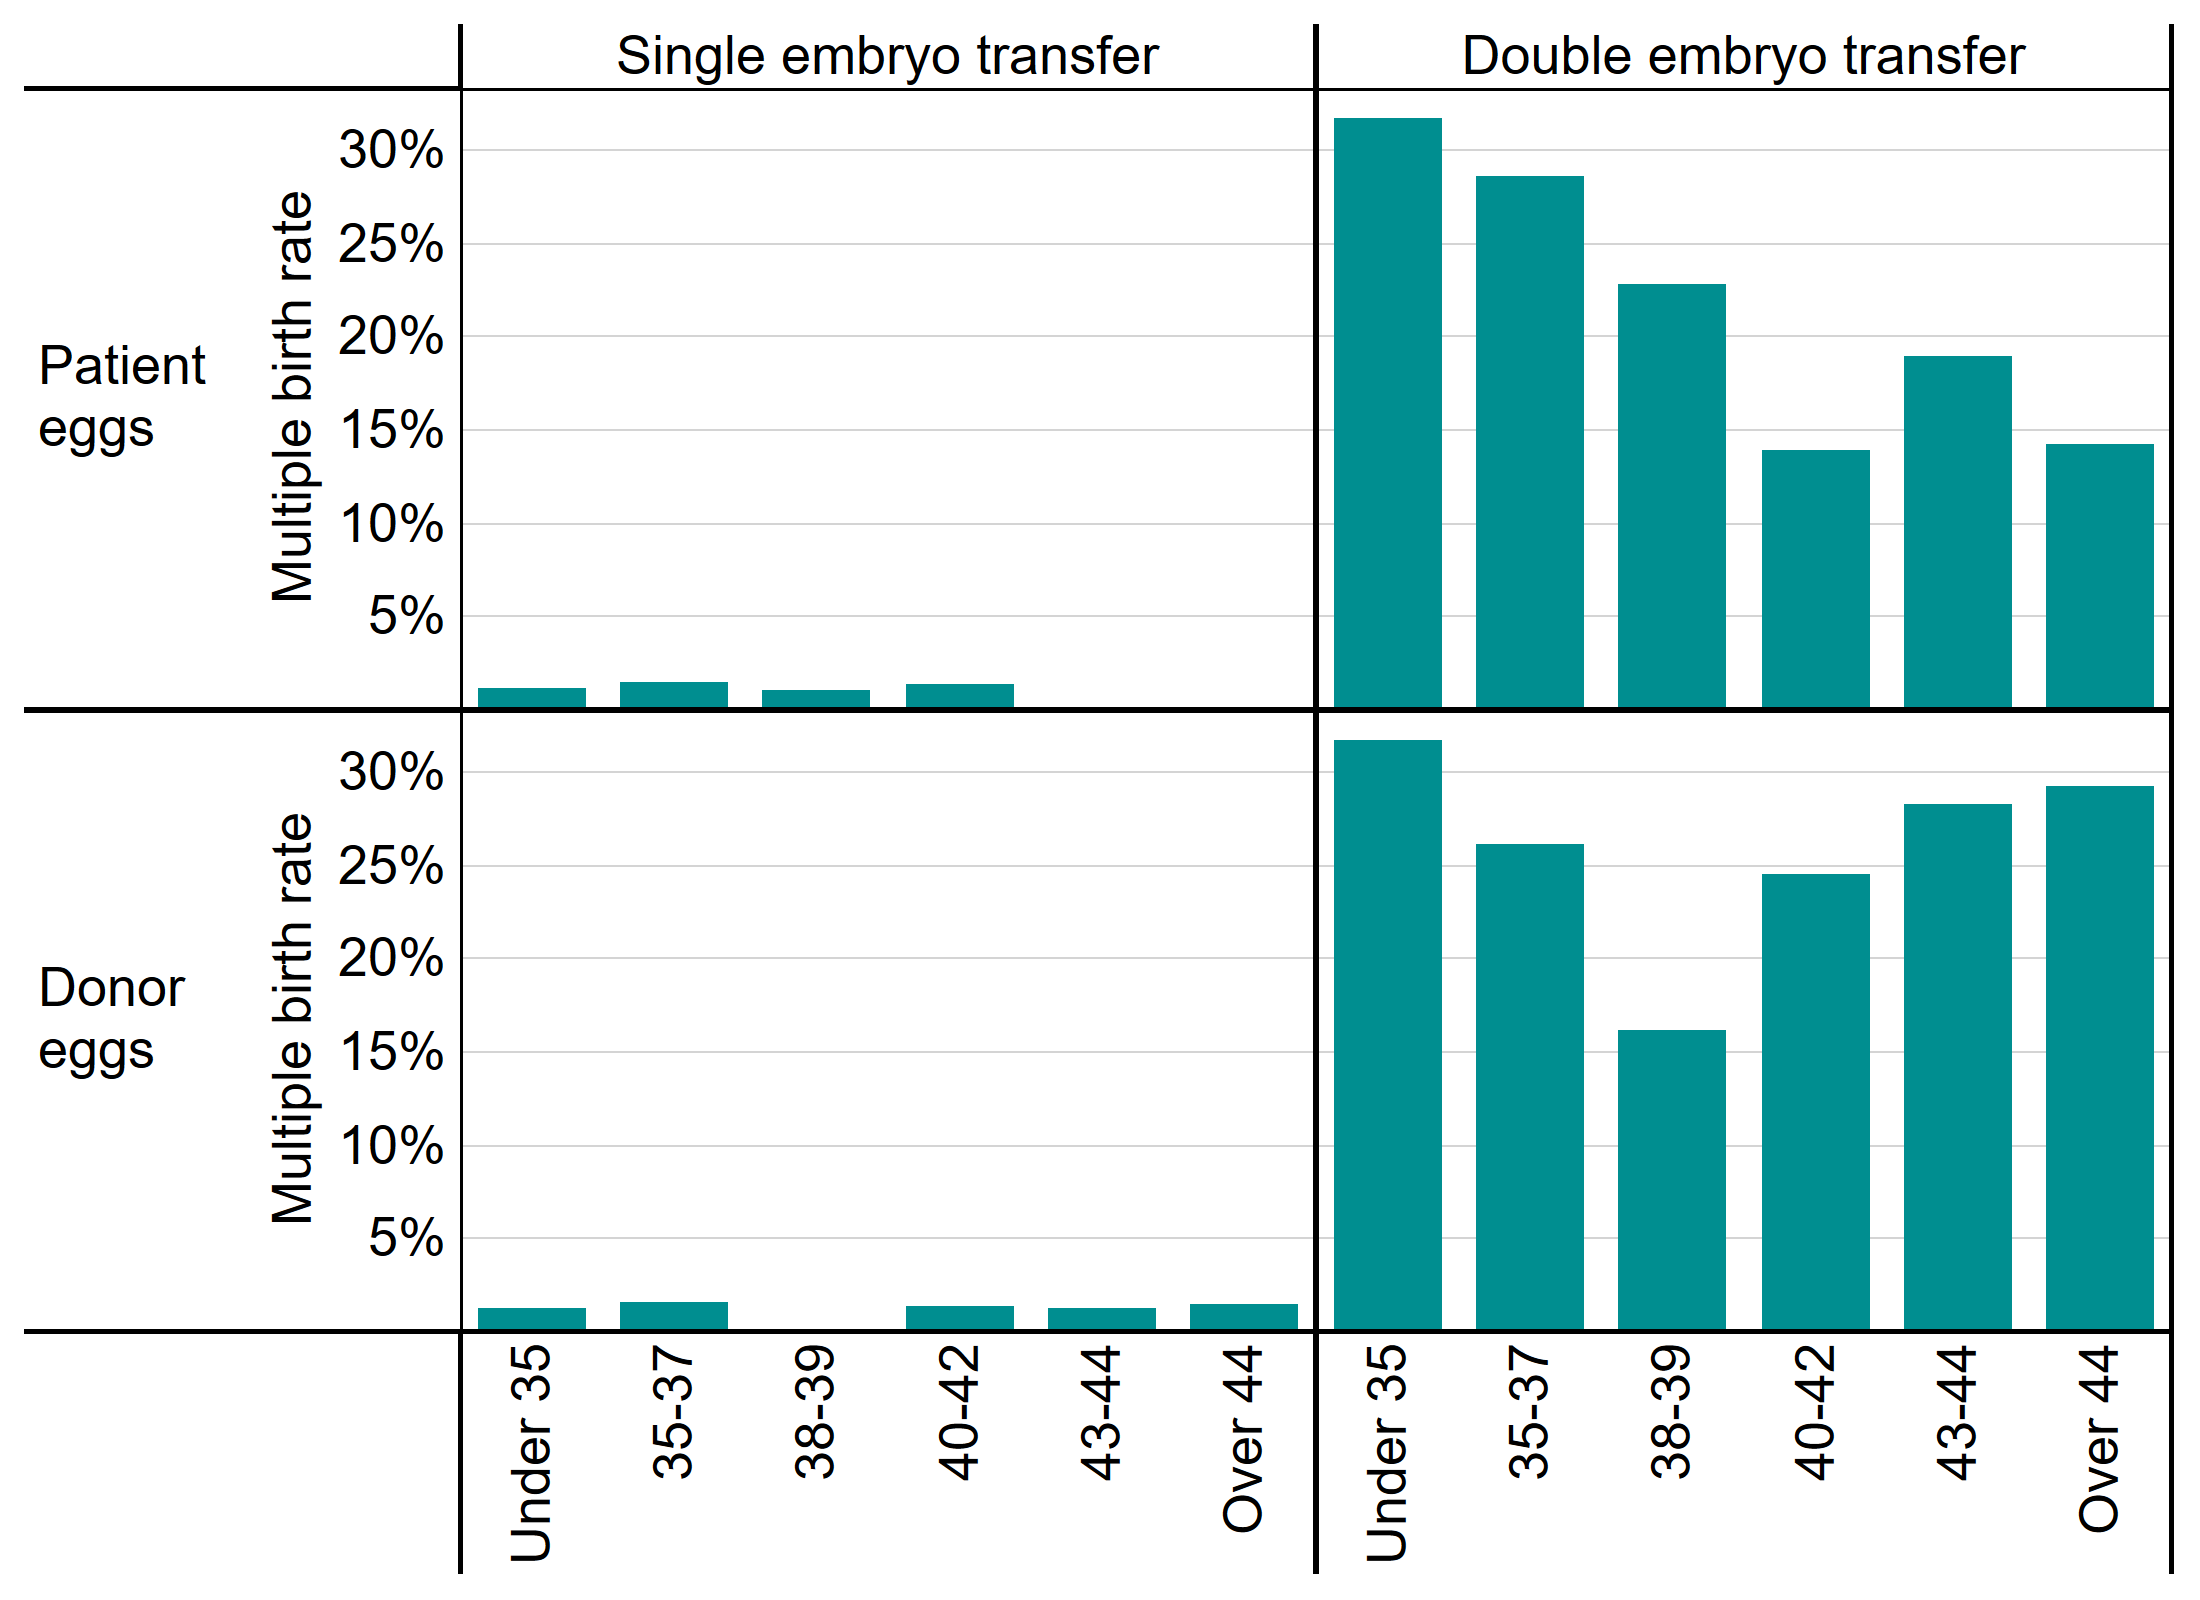 This bar chart shows the multiple birth rate in IVF treatment cycles by patient age bands, egg source (donor eggs or patient eggs) and the number of embryos transferred (one or two). Multiple birth rates for single embryo transfers are between 0% and 2% for all age groups and egg sources. Multiple birth rates for double embryo transfers are highest for younger patients when patient eggs are used at about 31% for patients under 35, decreasing to about 13% for patients over 44 years of age. For double embryo transfers using donor eggs, the highest multiple birth rates are seen with the youngest and oldest patients, with patients under 35 having a multiple birth rate around 31% and patients over 44 having a multiple birth rate of about 29%.